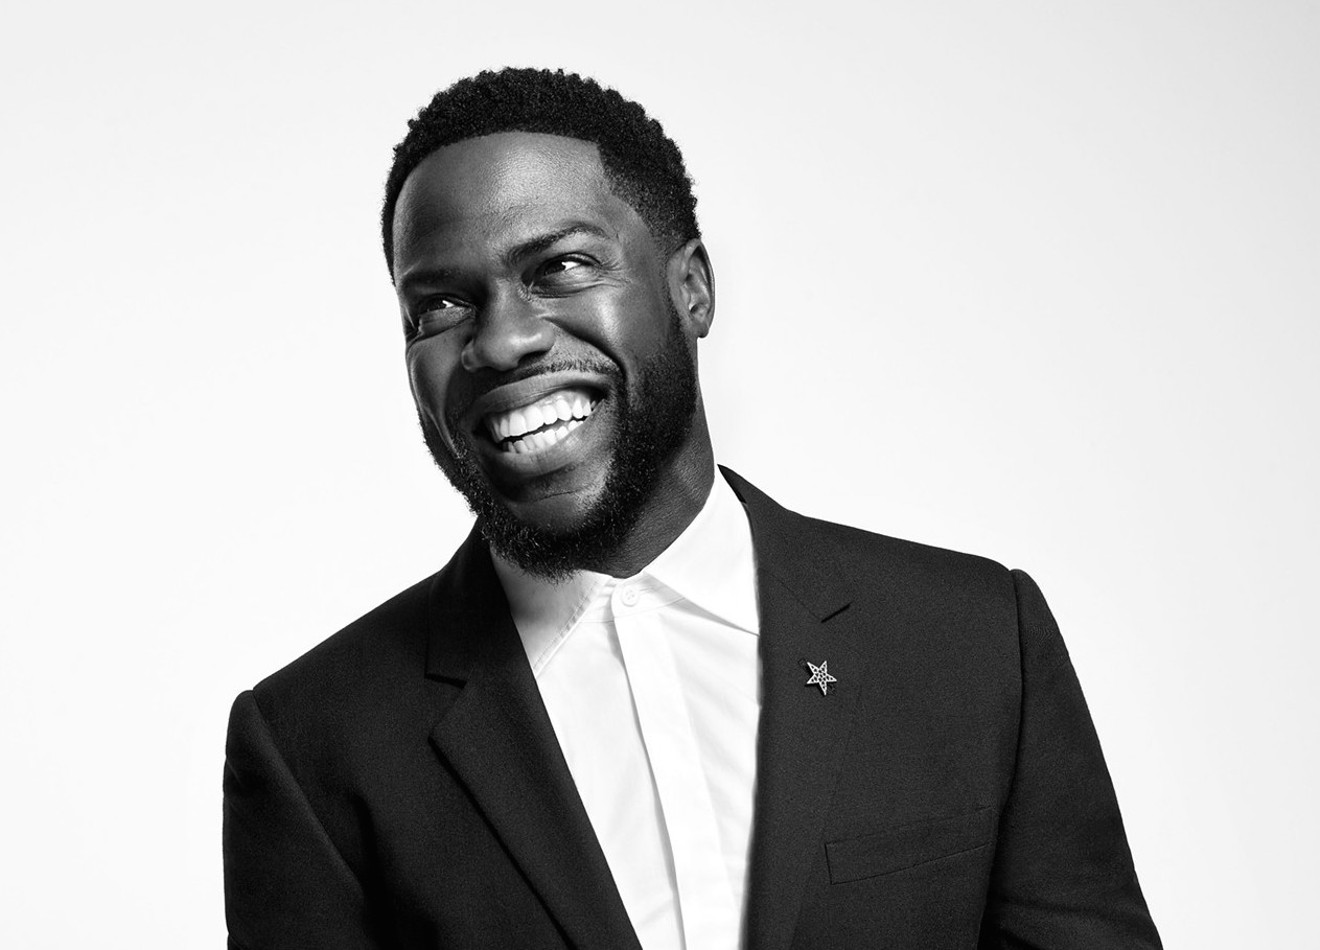 Kevin Hart's jokes about women have divided comedy fans.